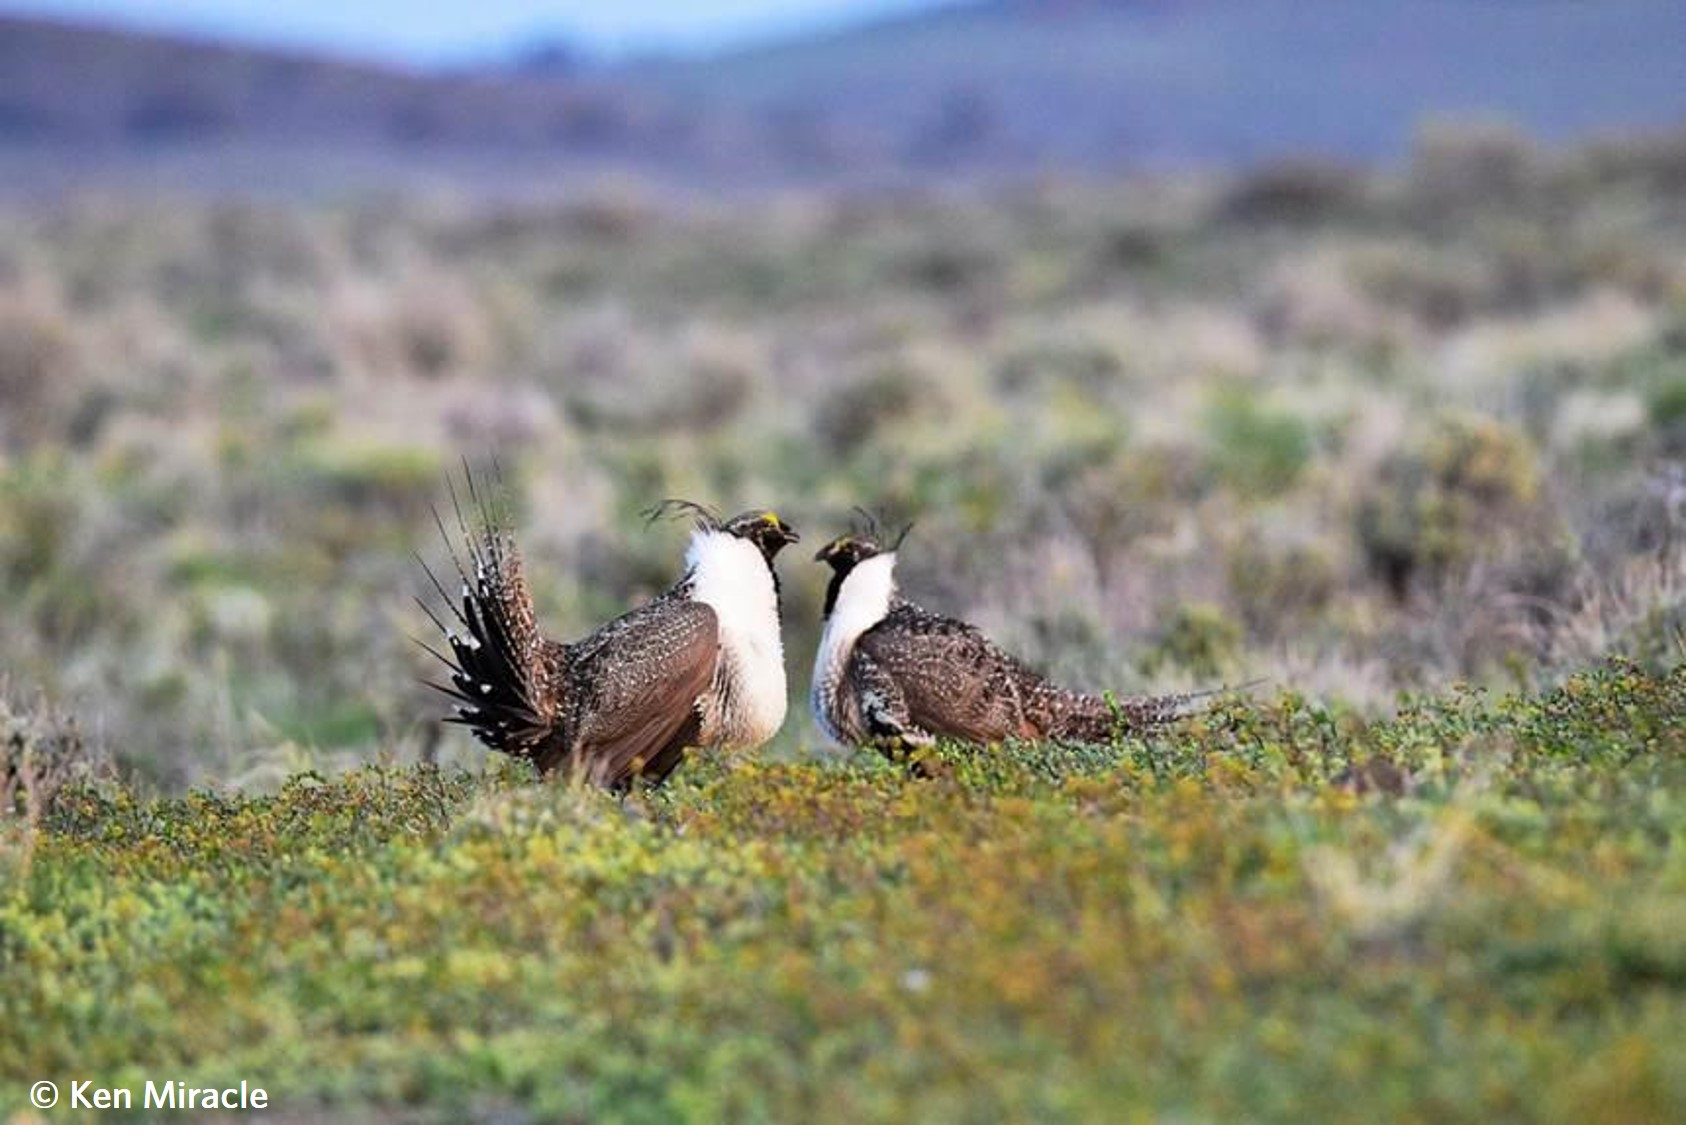 Two sage grouse facing one another with their feathers ruffled up for a fight. Image copyright Ken Miracle.